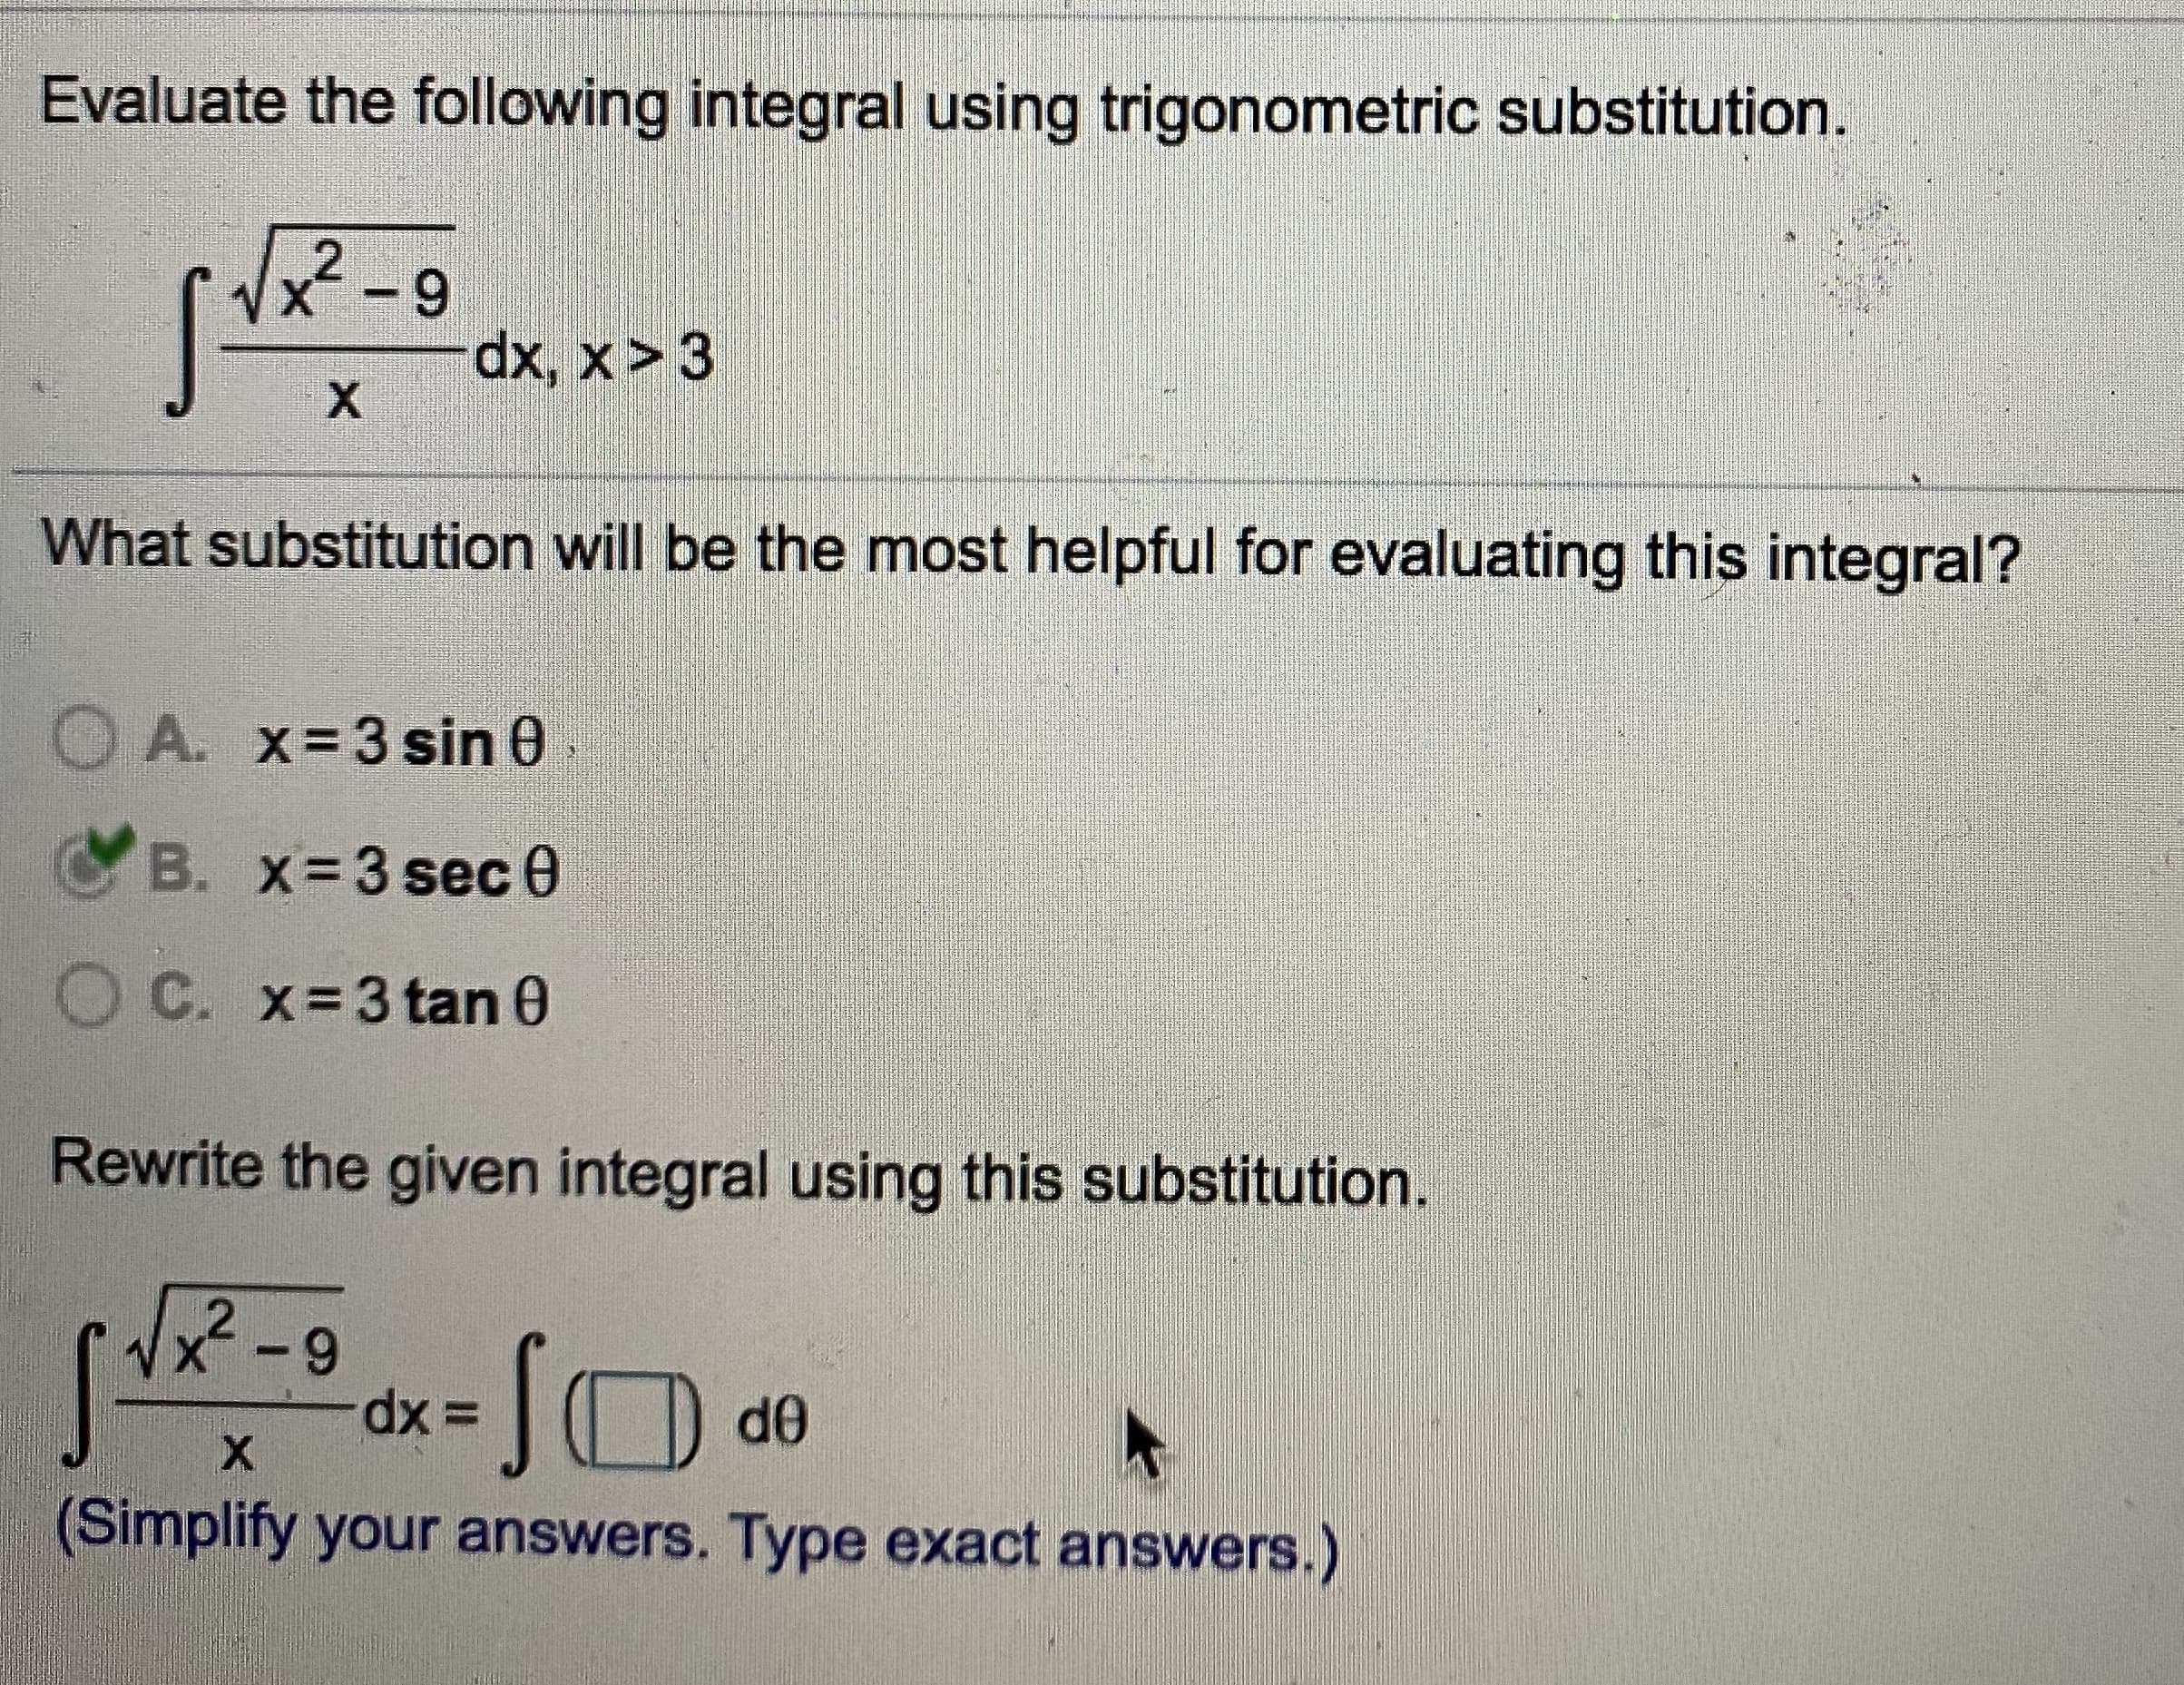 Evaluate the following integral using trigonometric substitution.
12-9
(x, x>3
